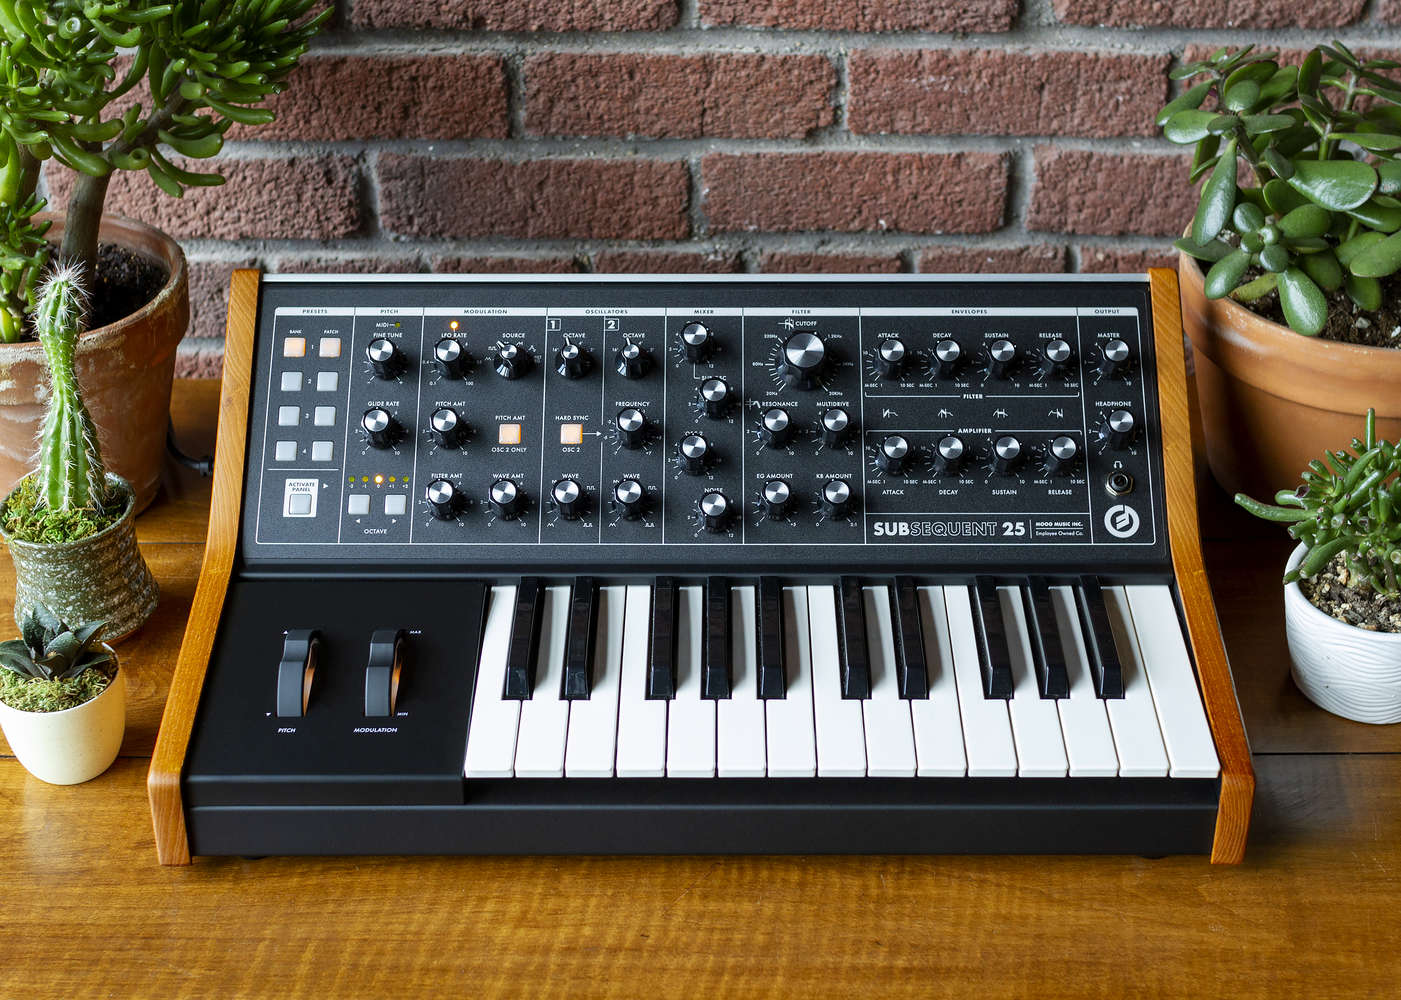 Moog Subsequent 25 - Synthesizer - Variation 2